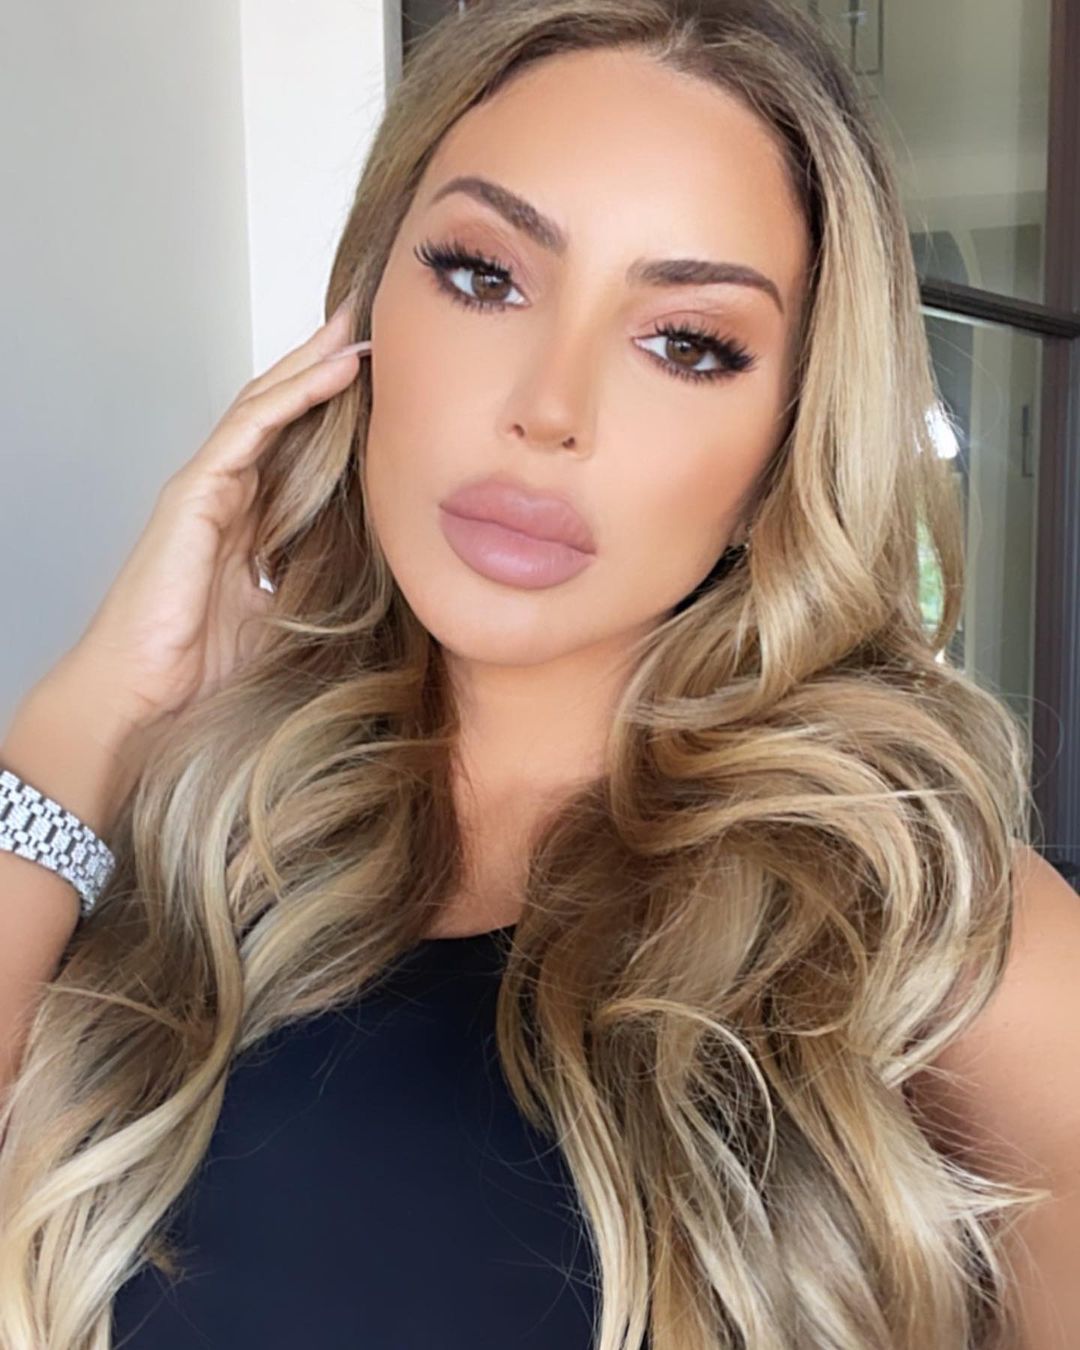 Larsa Pippen West Age, Height, Wife, Family – Biographyprofiles